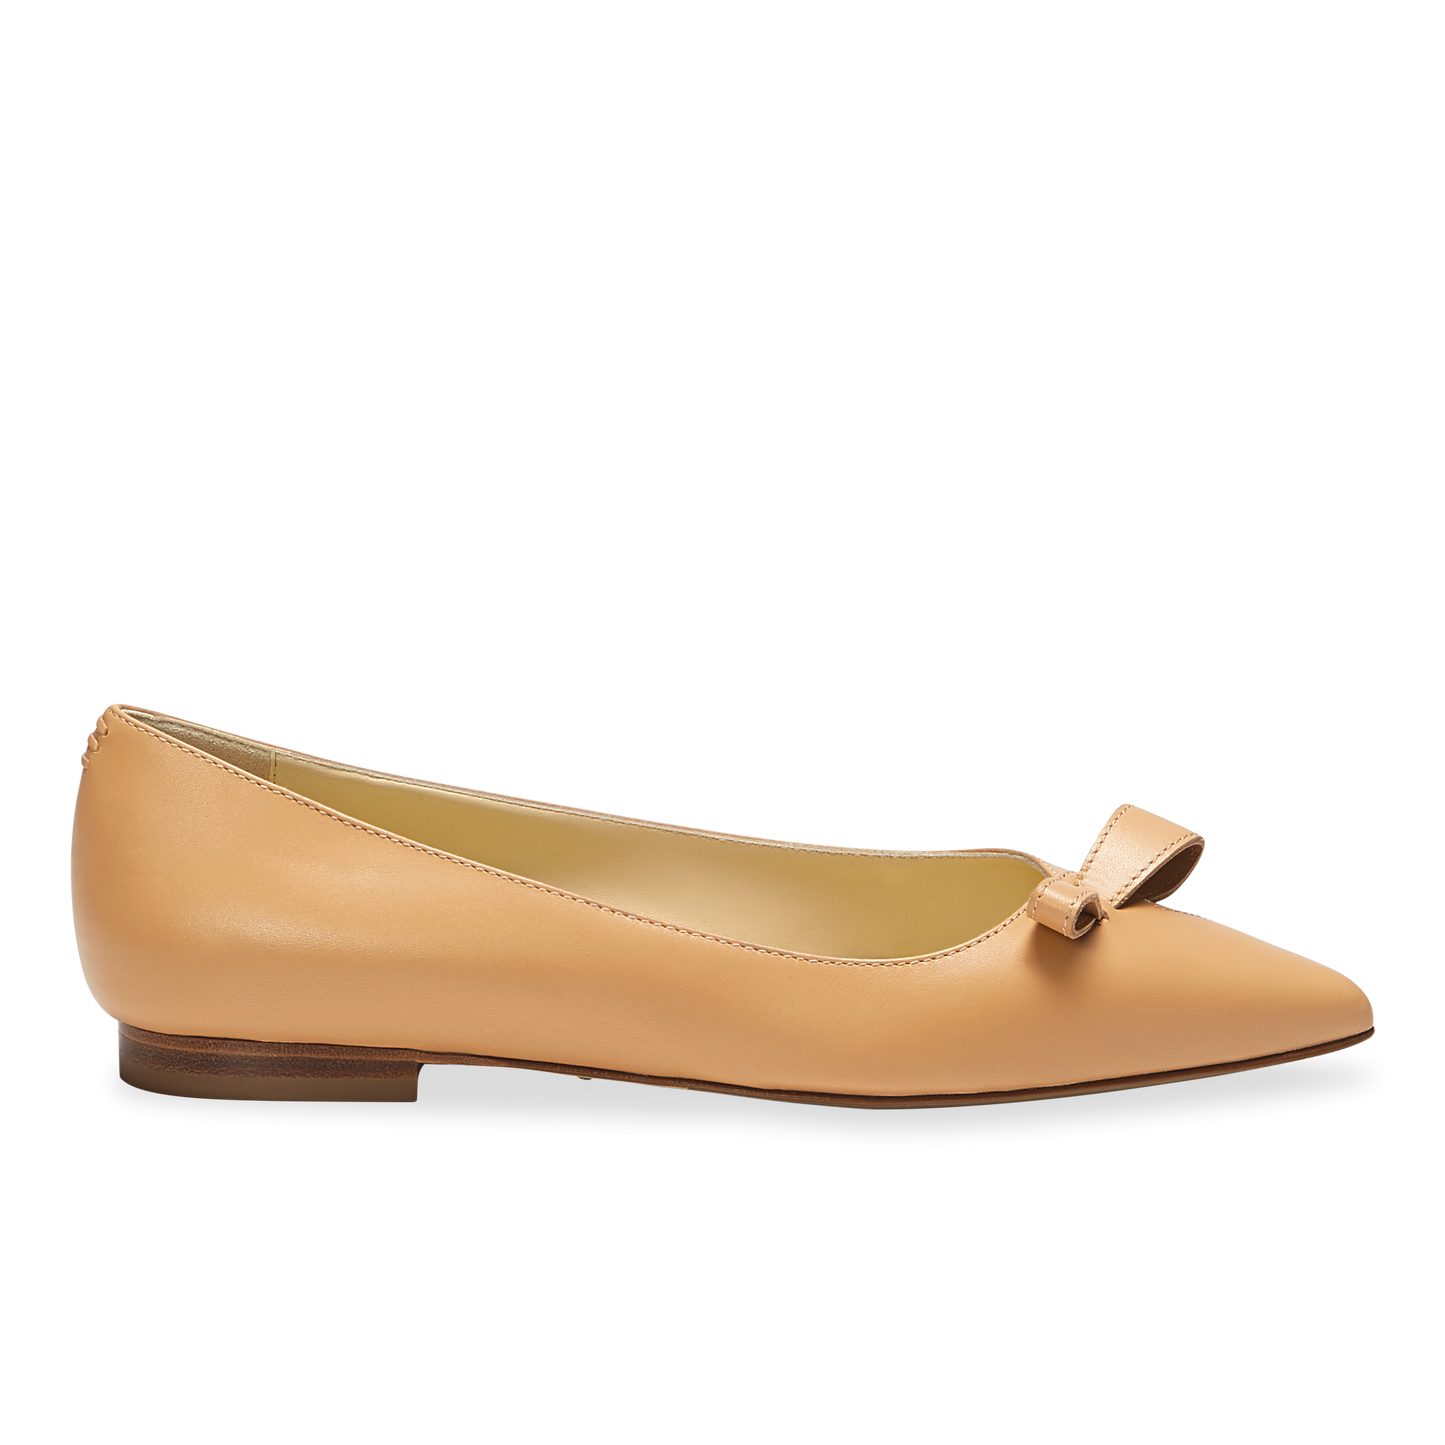 10mm Italian Made Natalie Pointed Toe Flat in Sand Calf